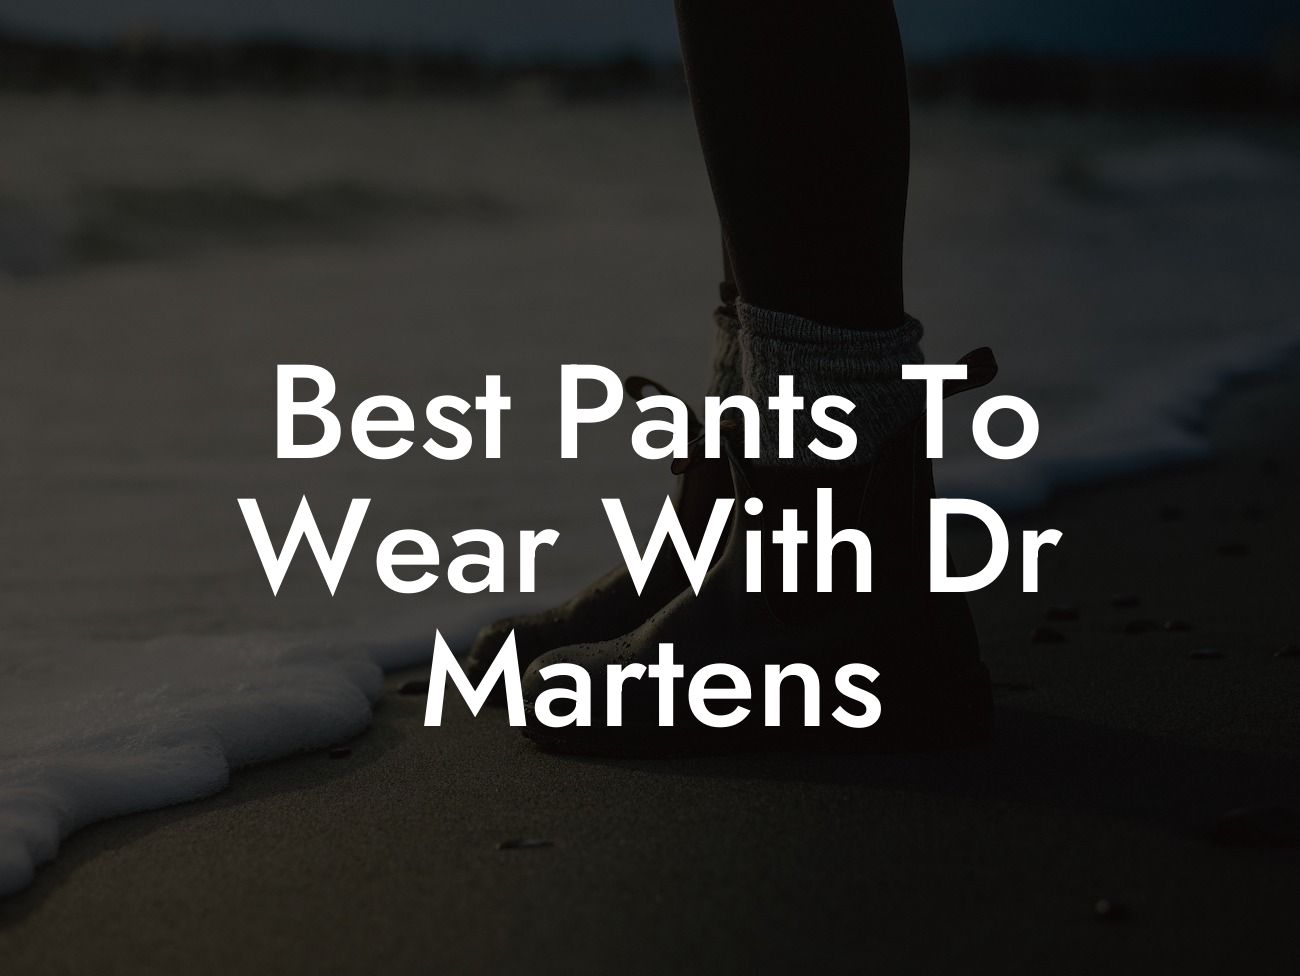 Best Pants To Wear With Dr Martens